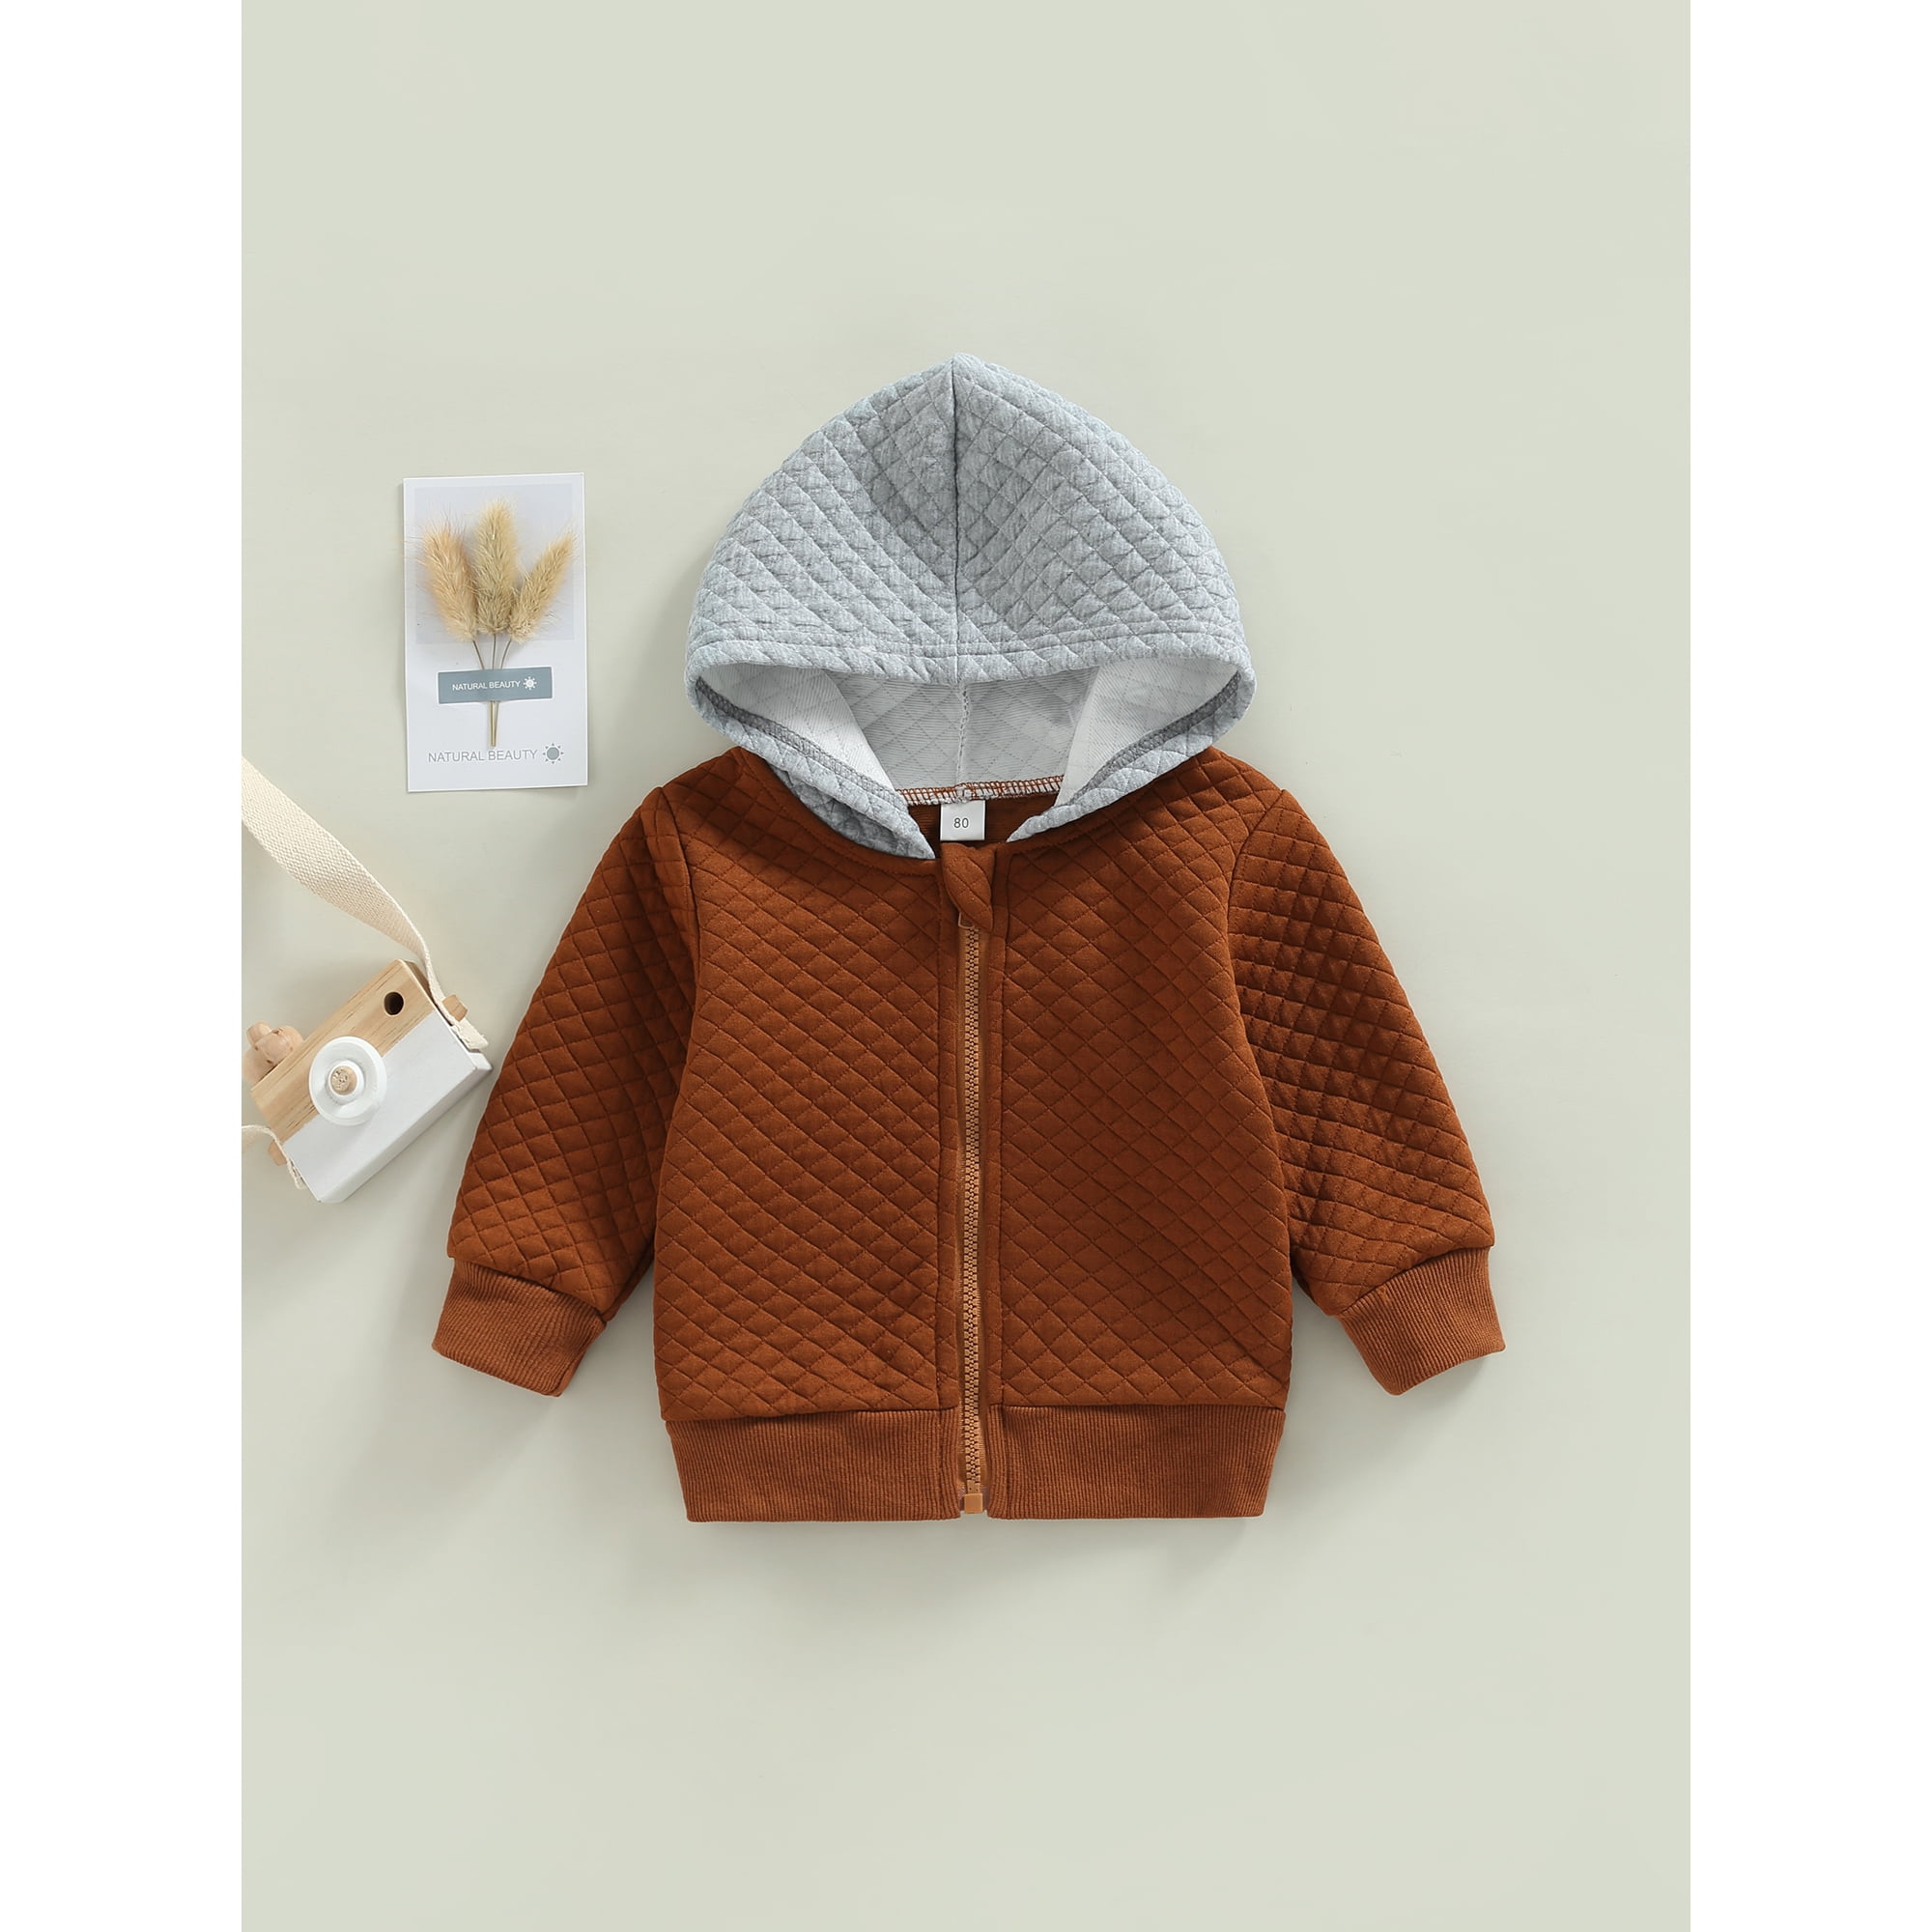 Toddler Baby Boy Girl Quilted Jacket Hoodie Coat Color Block Long Sleeve  Zipper Hooded Jackets Top Warm Outwear